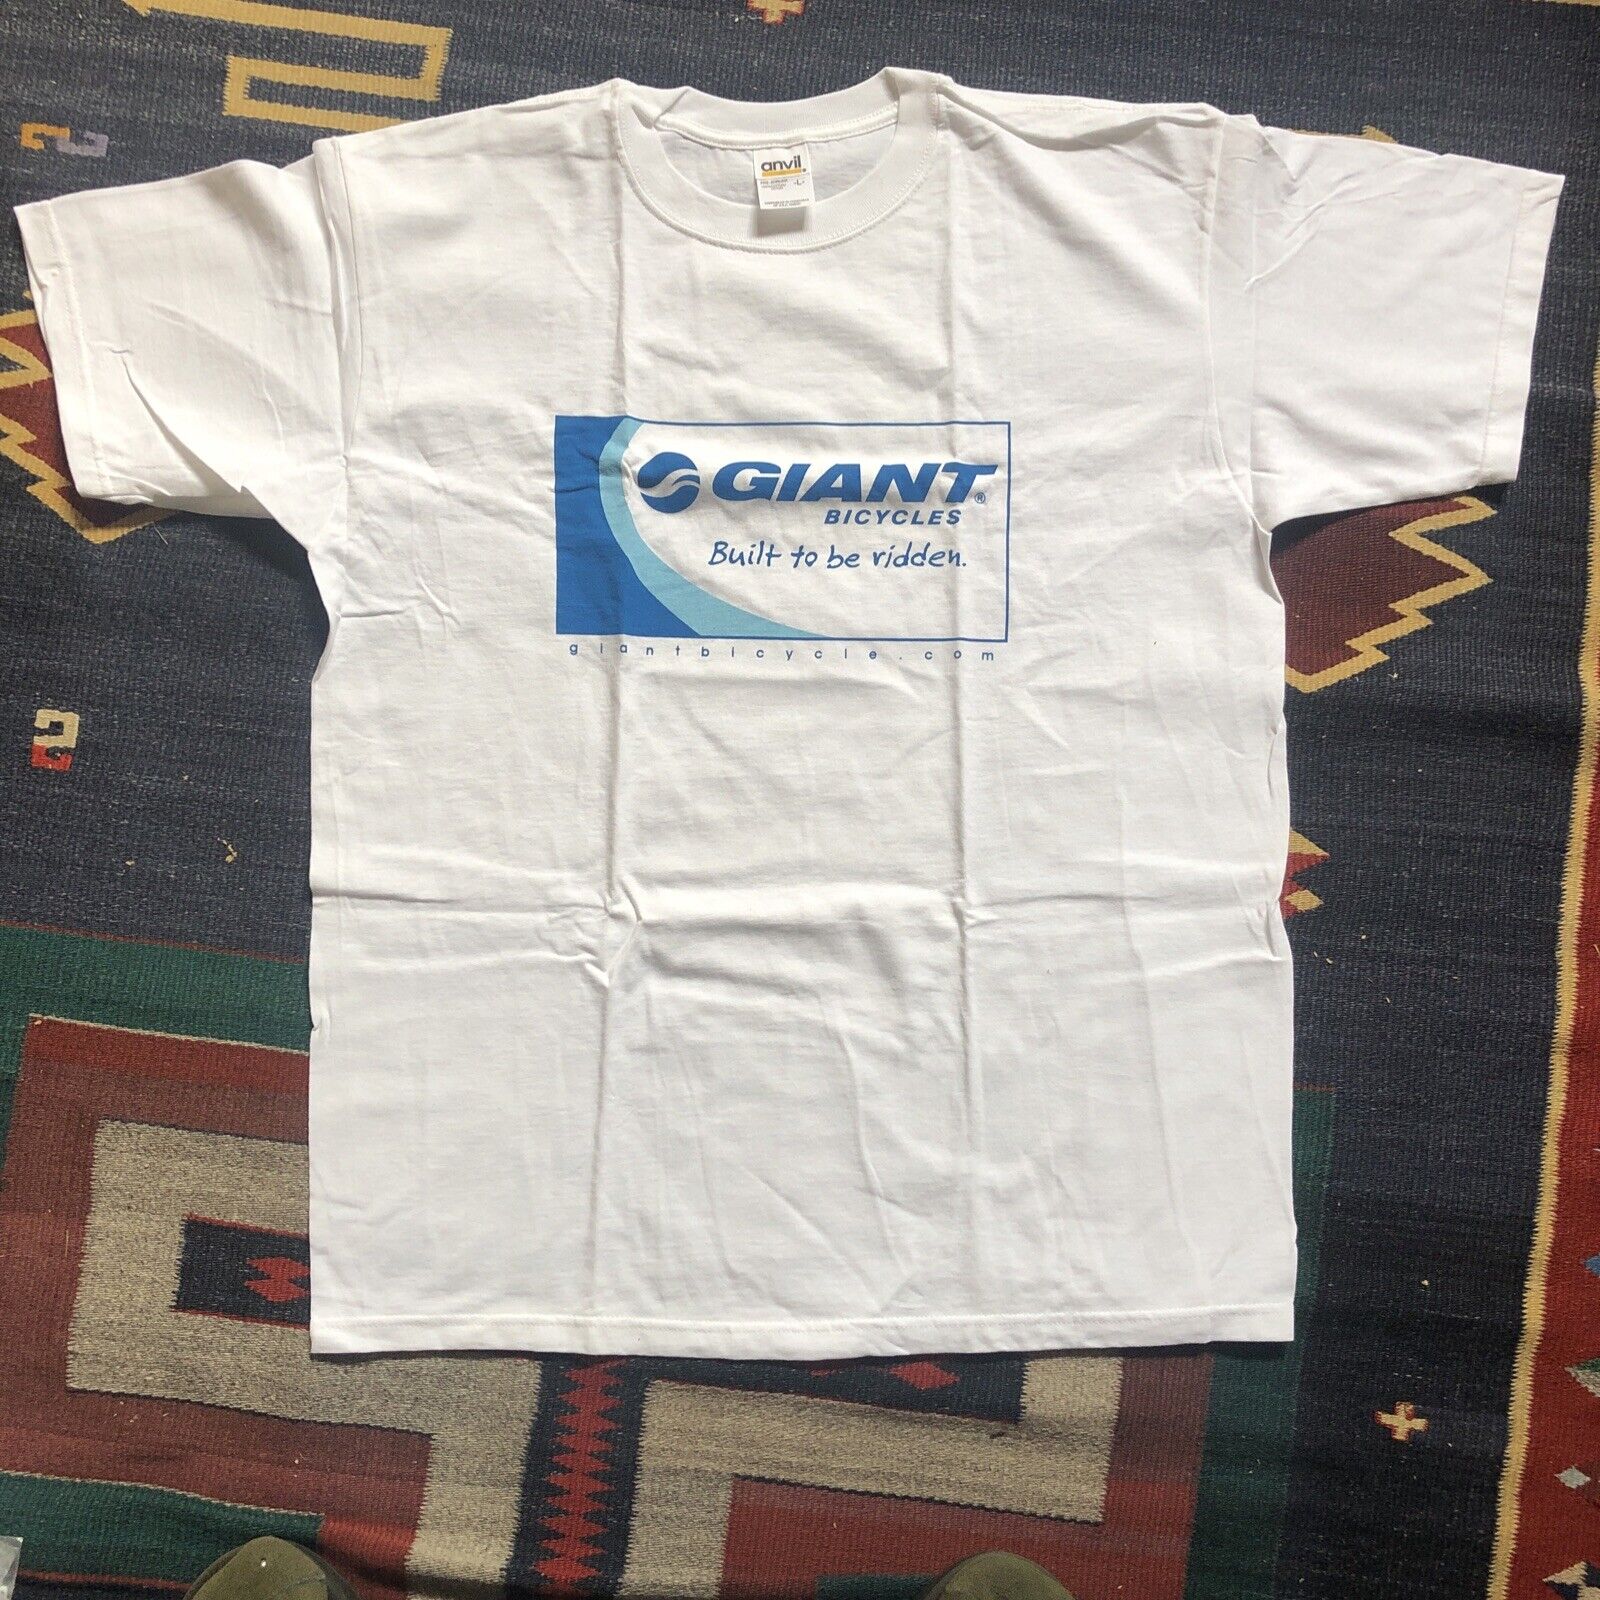 New-Old-Stock GIANT BICYCLES T-Shirt • and#034;Built to be Riddenand#034; L or XL eBay